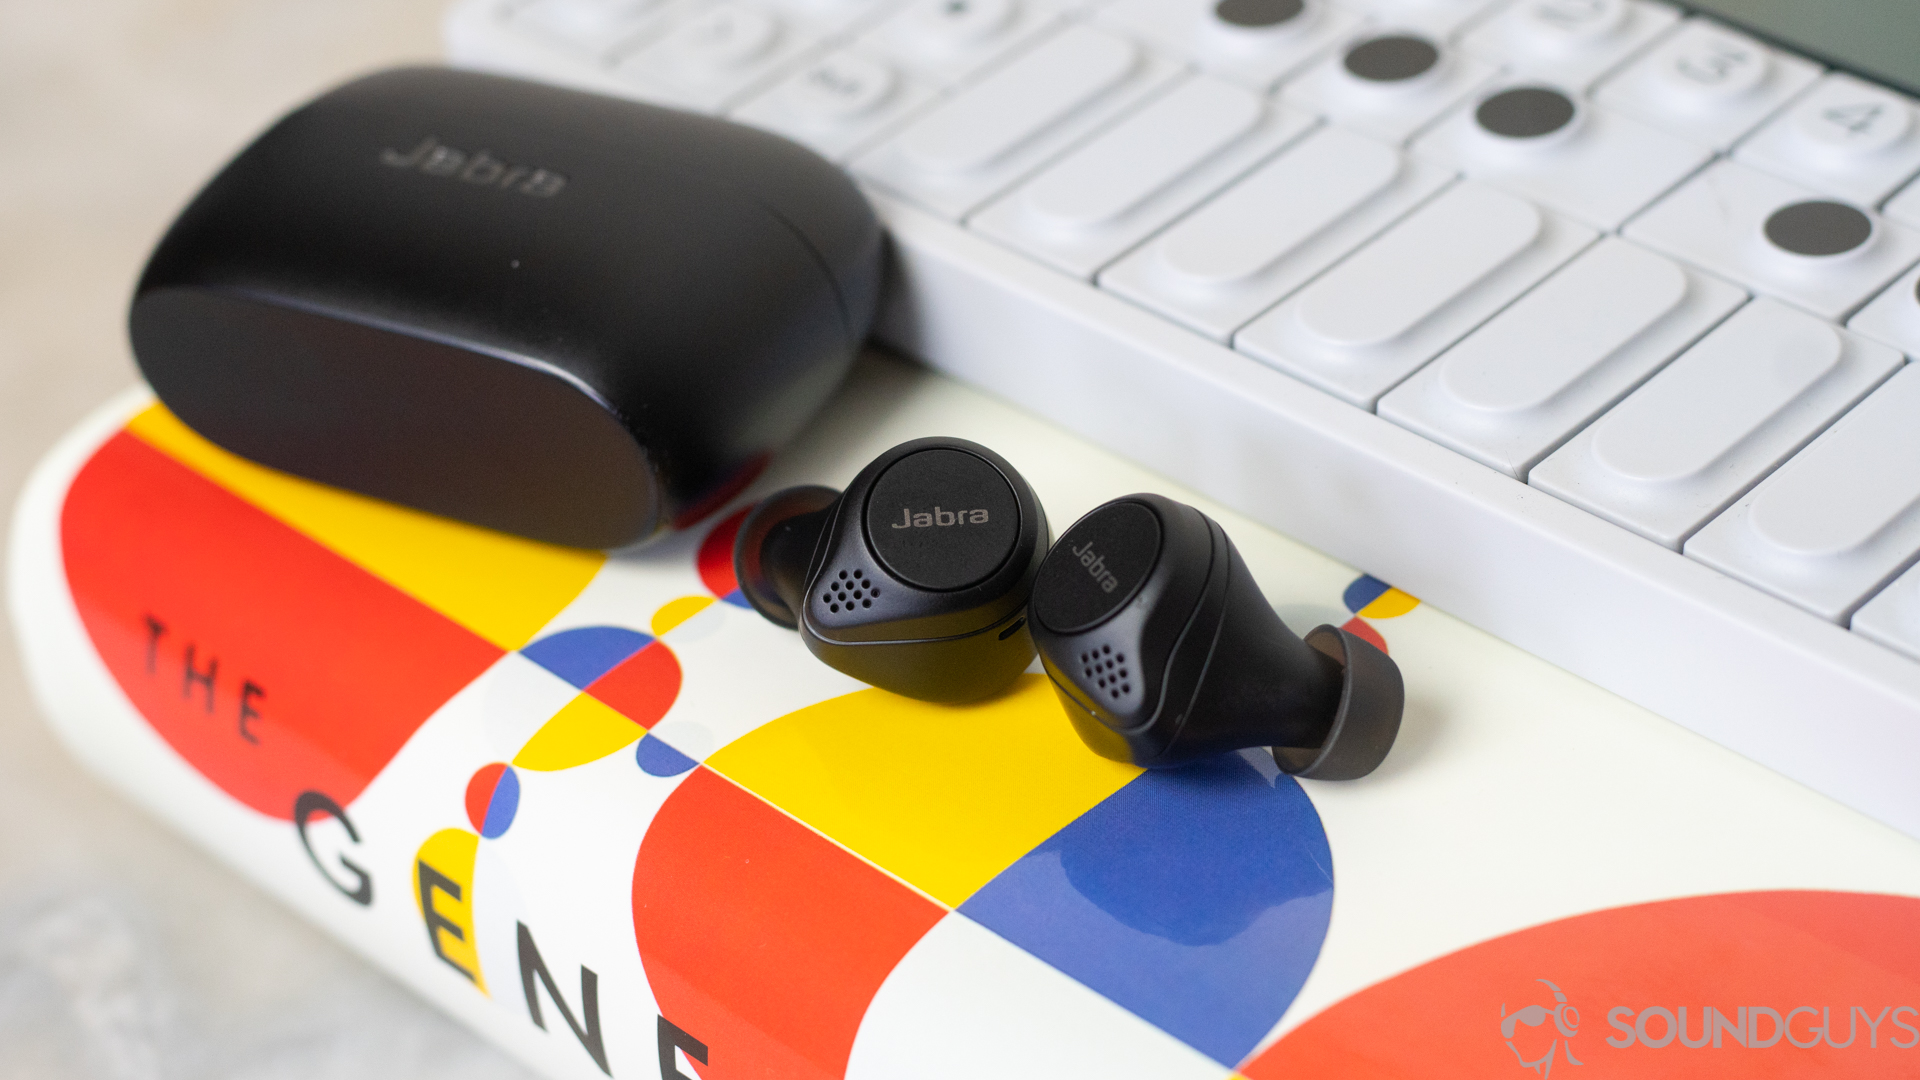 The Jabra Elite 75 earbuds on top of a book and next to synthesizer